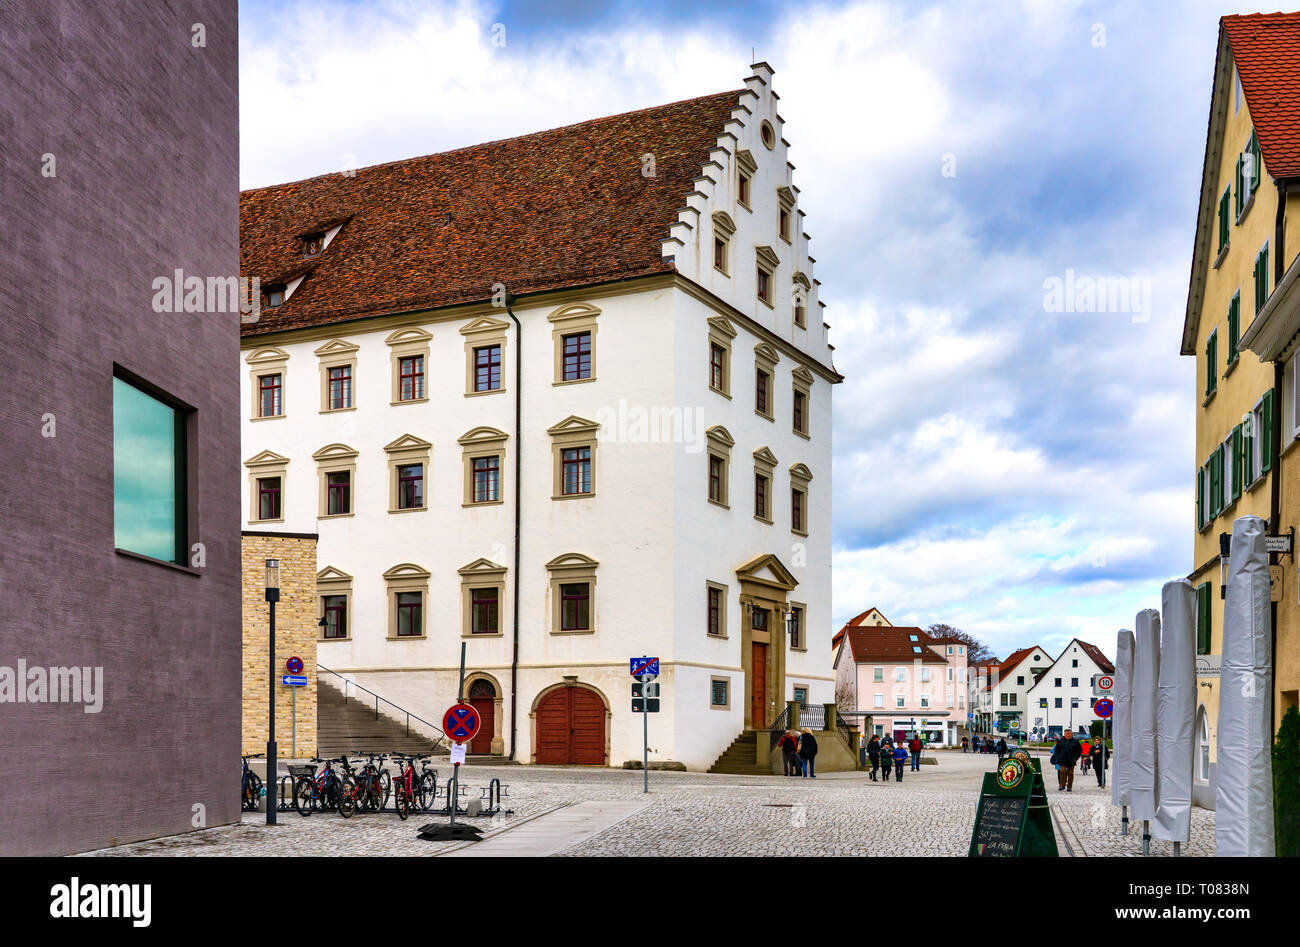 Rottenburg, Germany, 16/03/2019: The building with two wings and remarkable crow-stepped gables served the Jesuit order from 1691 to 1773 as course of Stock Photo